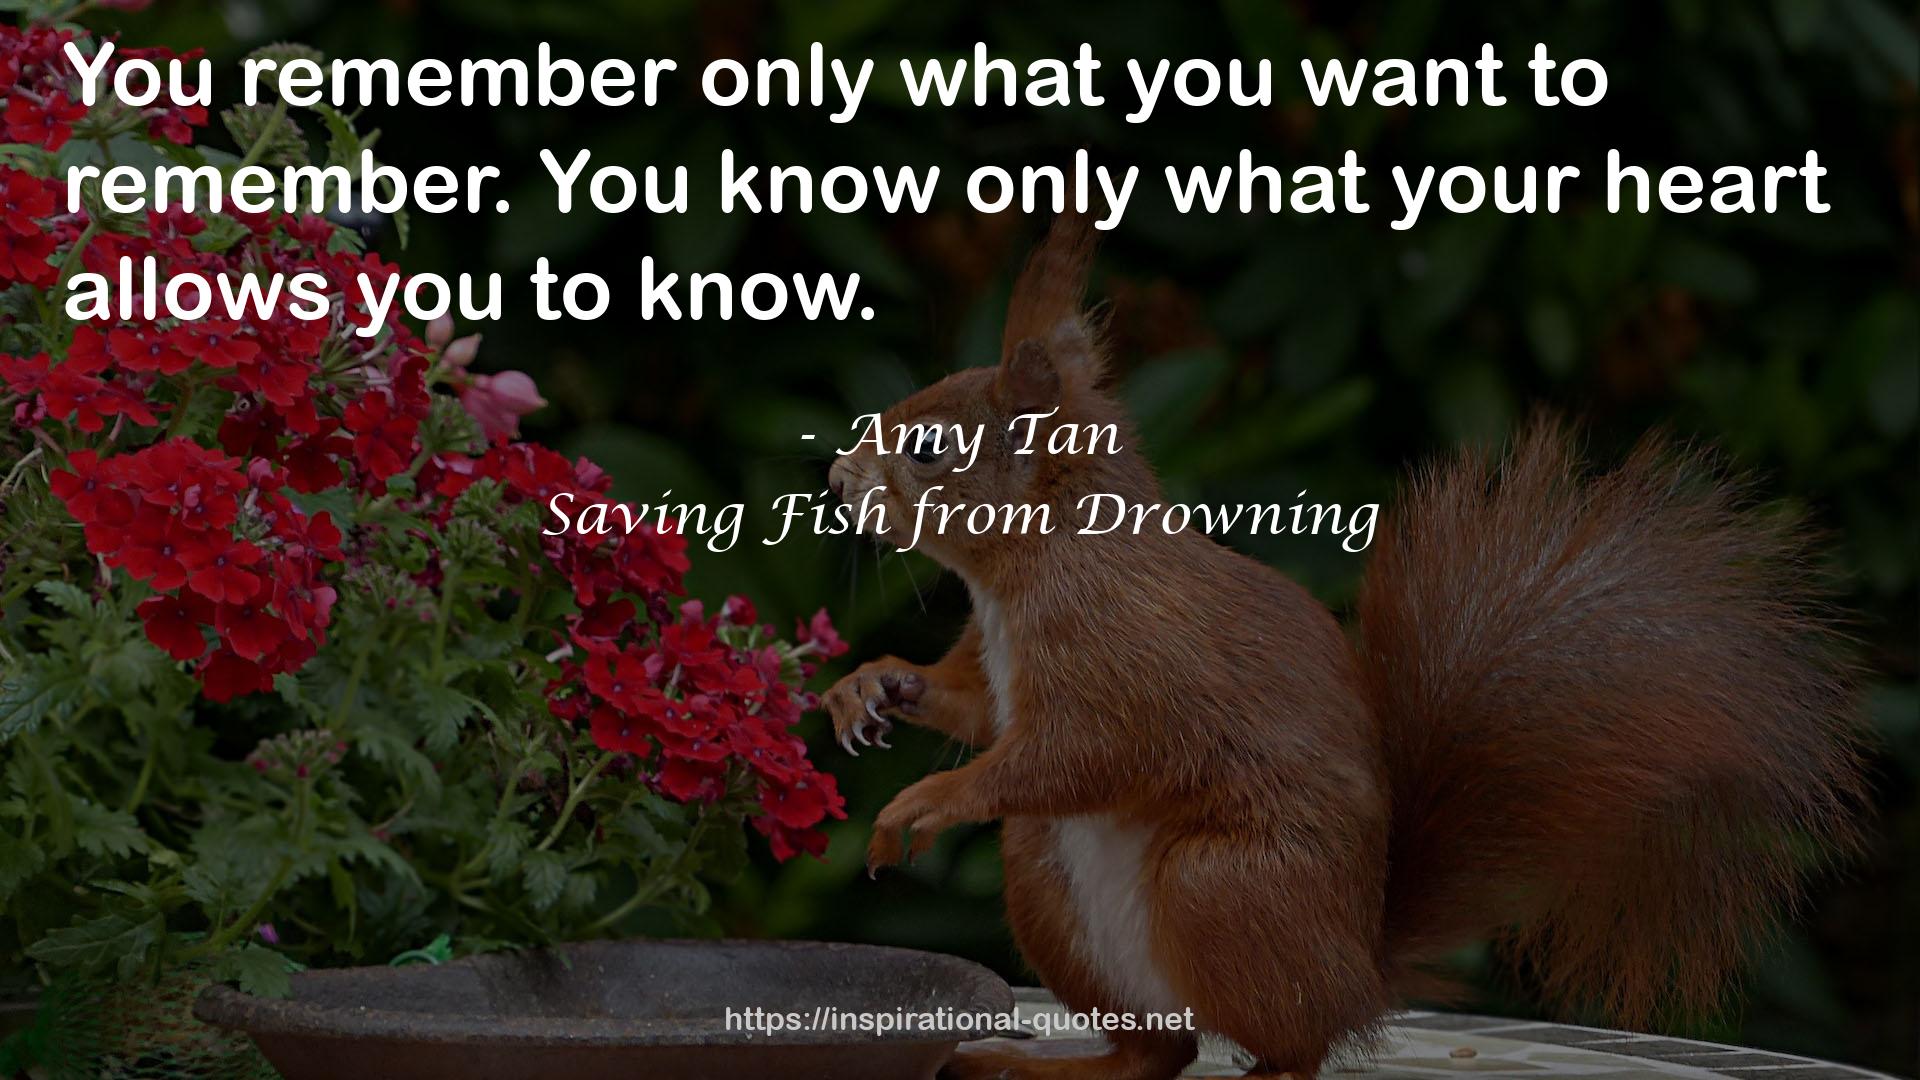 Saving Fish from Drowning QUOTES